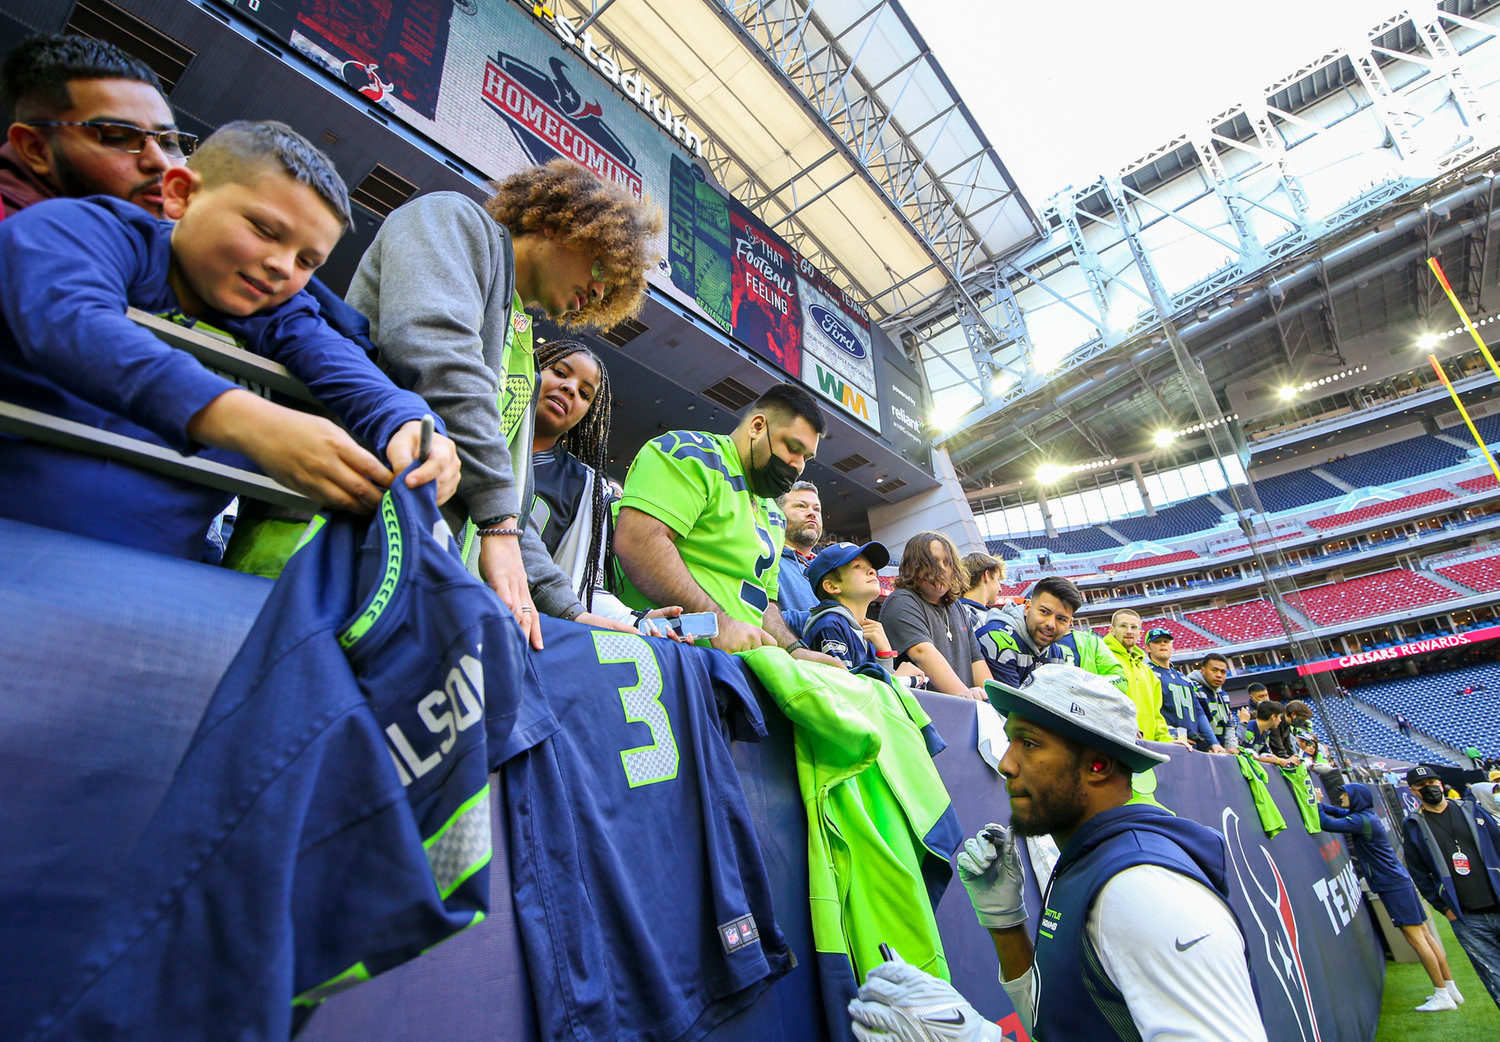 Seattle fans outnumber Texans fans in the stadium early as linebacker Carlos Dunlap II (8) signs souvenirs for Seahawks fans before the start of an NFL game on December 12, 2021 in Houston, Texas.